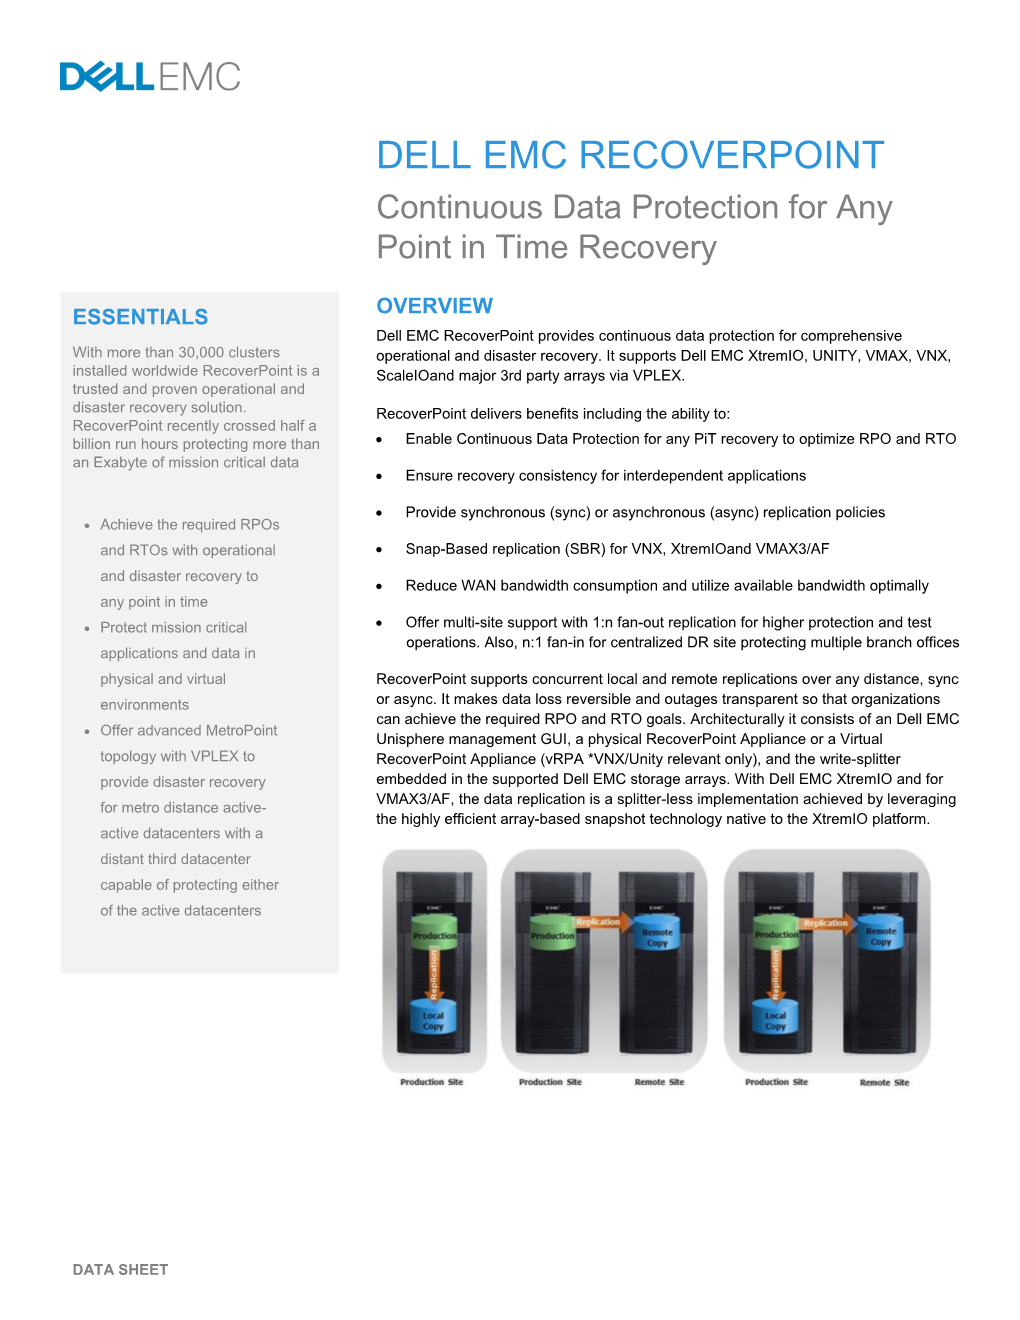 DELL EMC RECOVERPOINT Continuous Data Protection for Any Point in Time Recovery